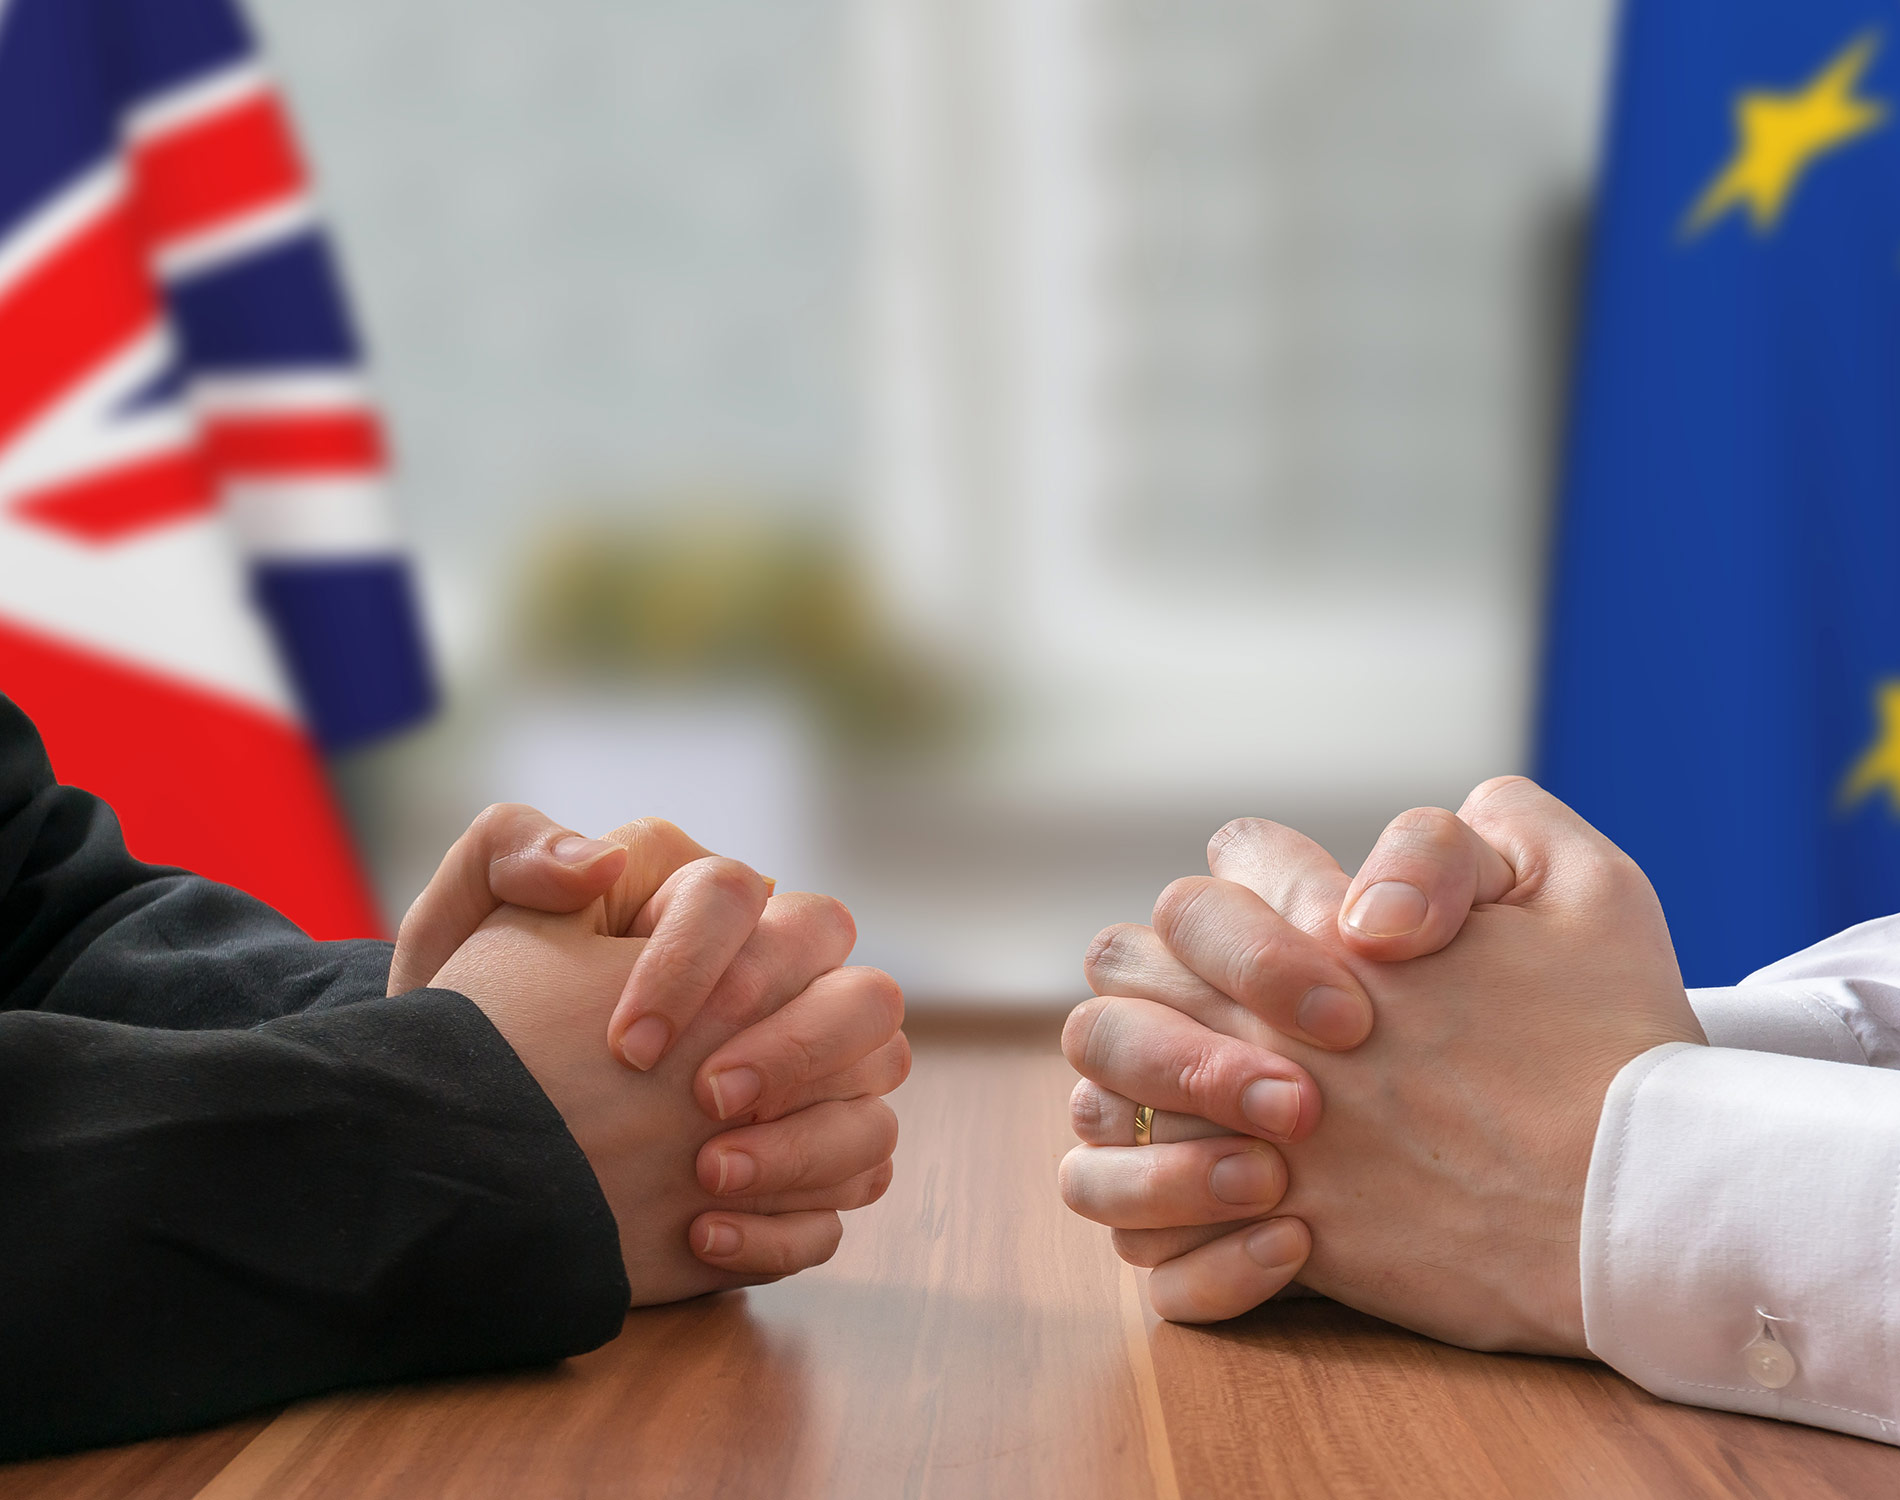 Negotiation of Great Britain and European Union (Brexit)